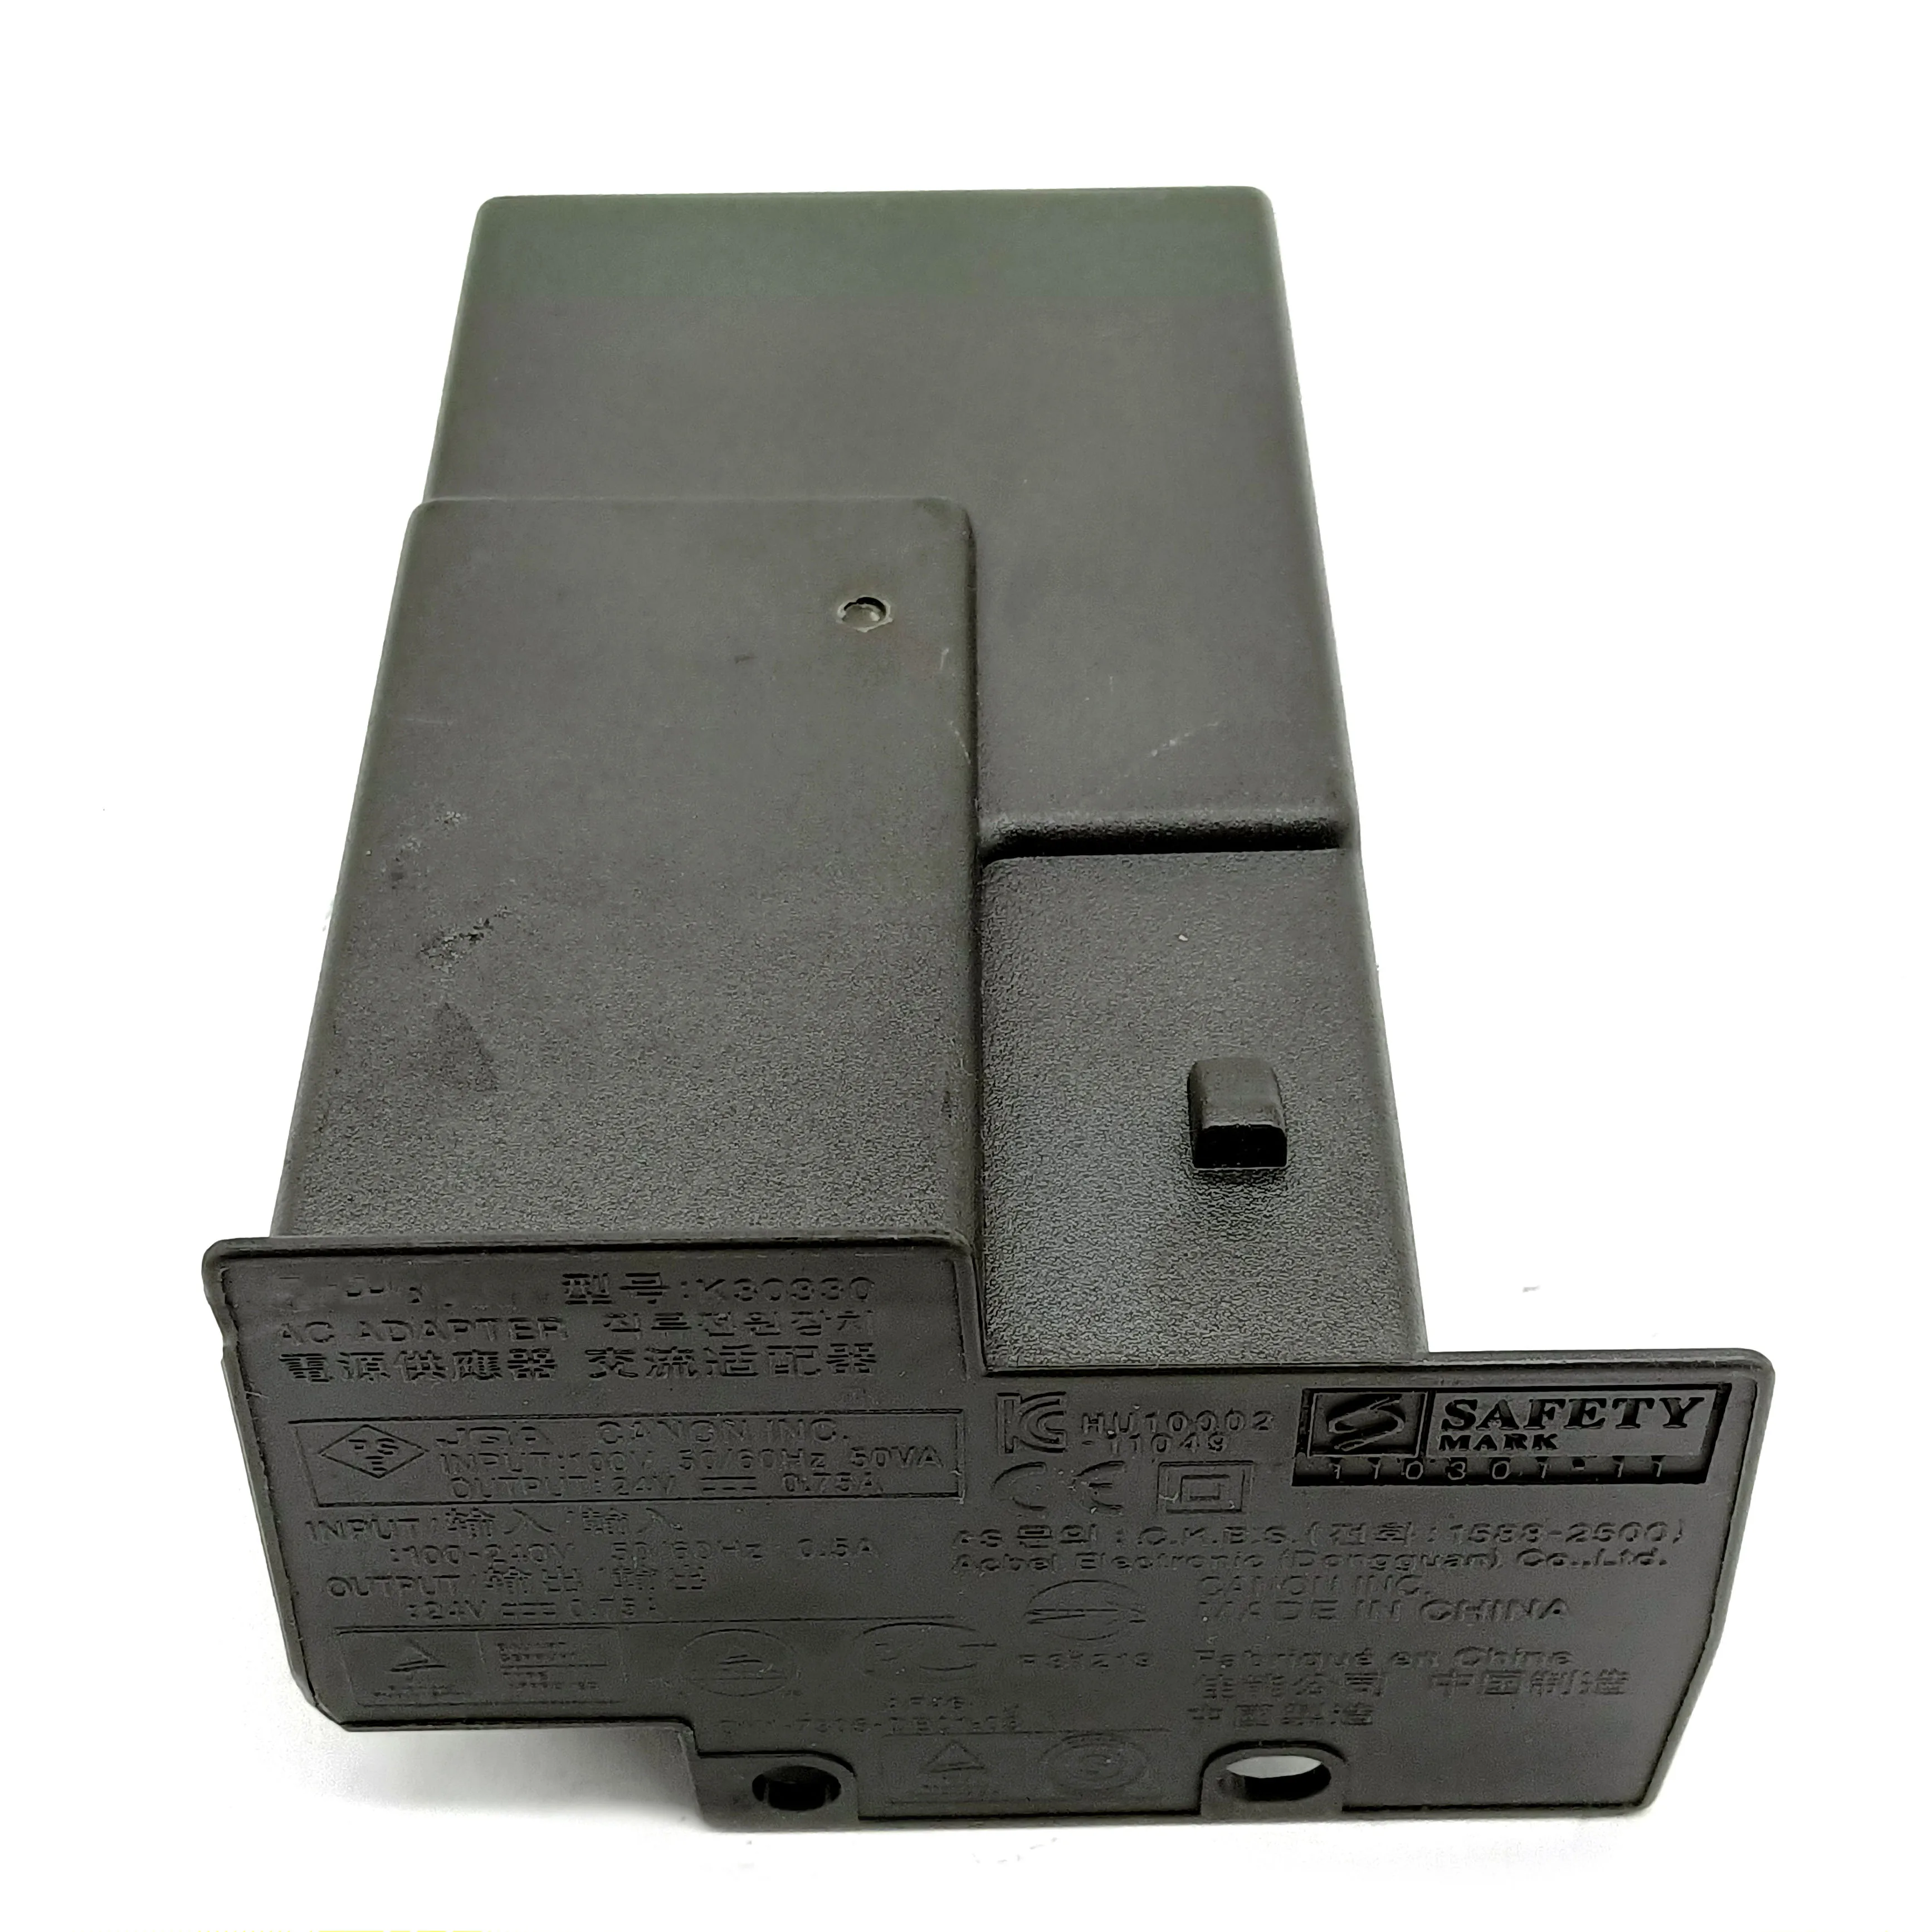 

Power Supply Adapter K30329 K30330 Fits For Canon MX378 MG2270 MX458 MX538 MX438 MG4170 MX470 MG3570 MX518 MX478 MG3170 MG2170